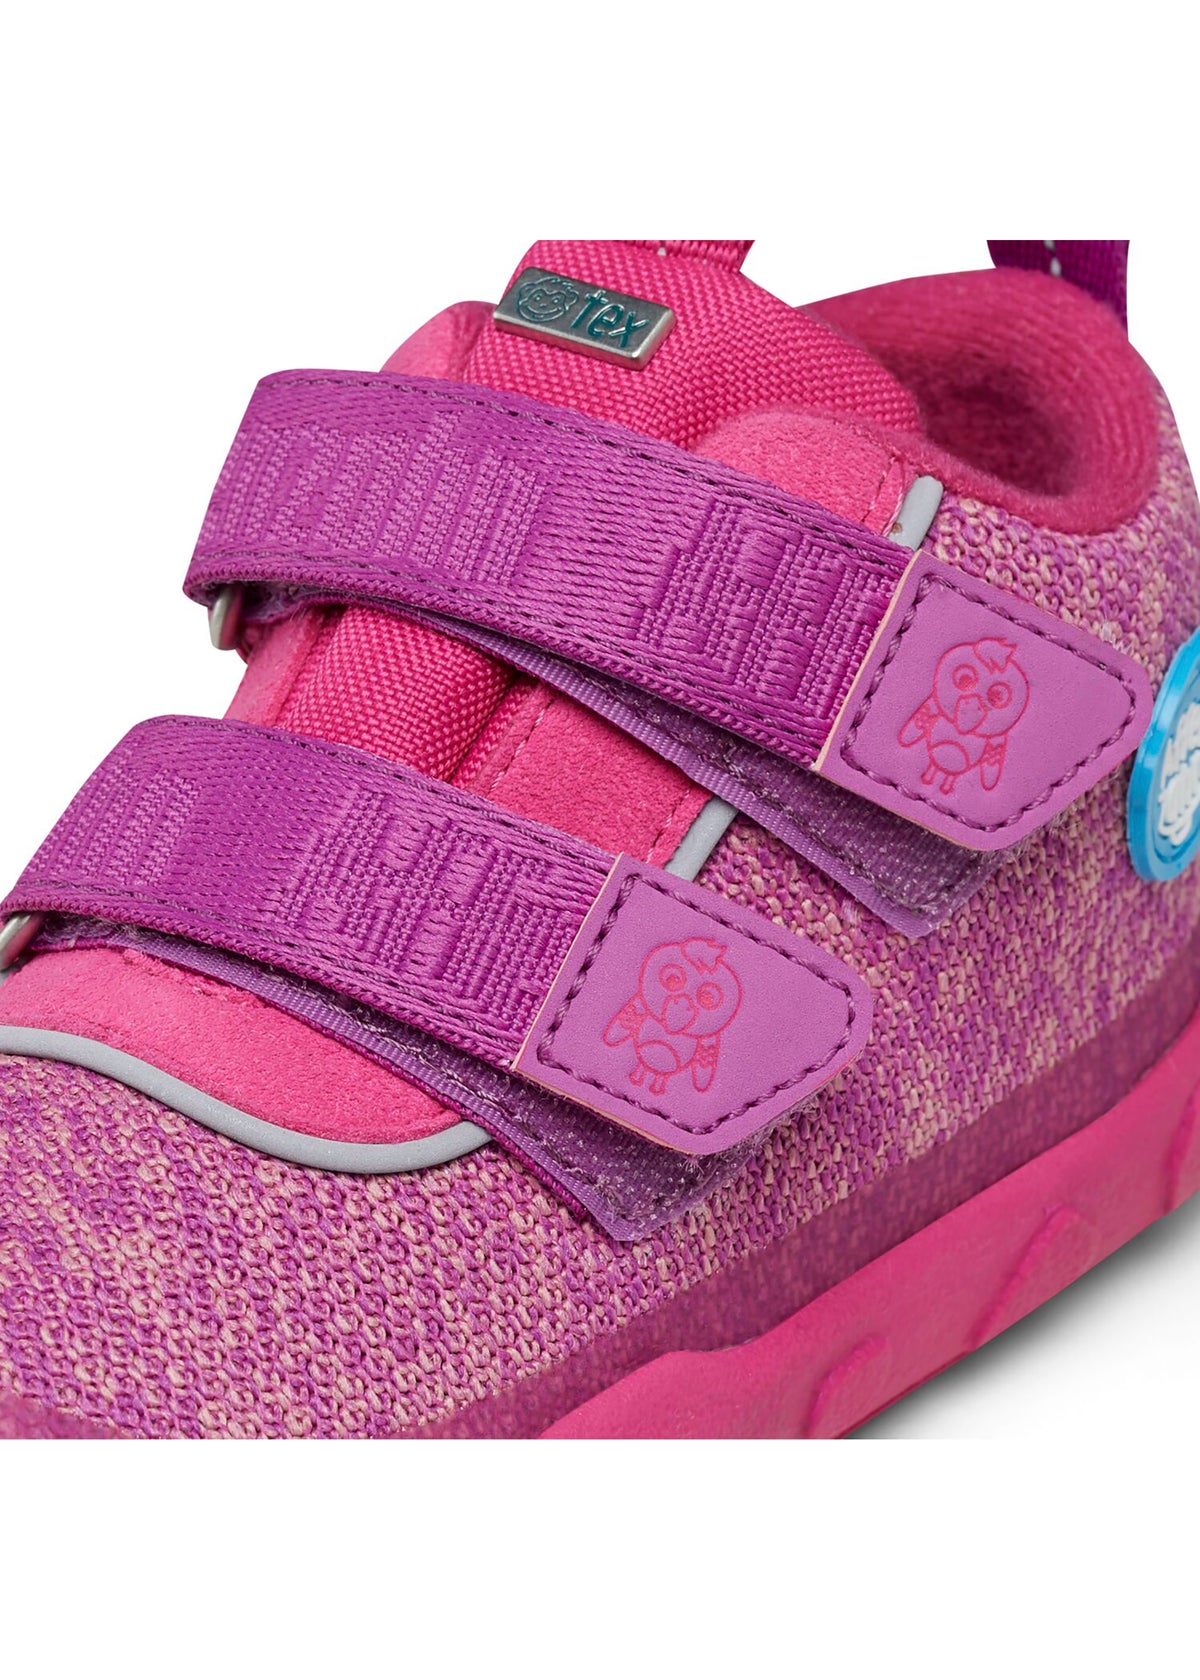 Children's barefoot shoes - Happy Knit Flamingo, mid-season shoes with TEX membrane - pink